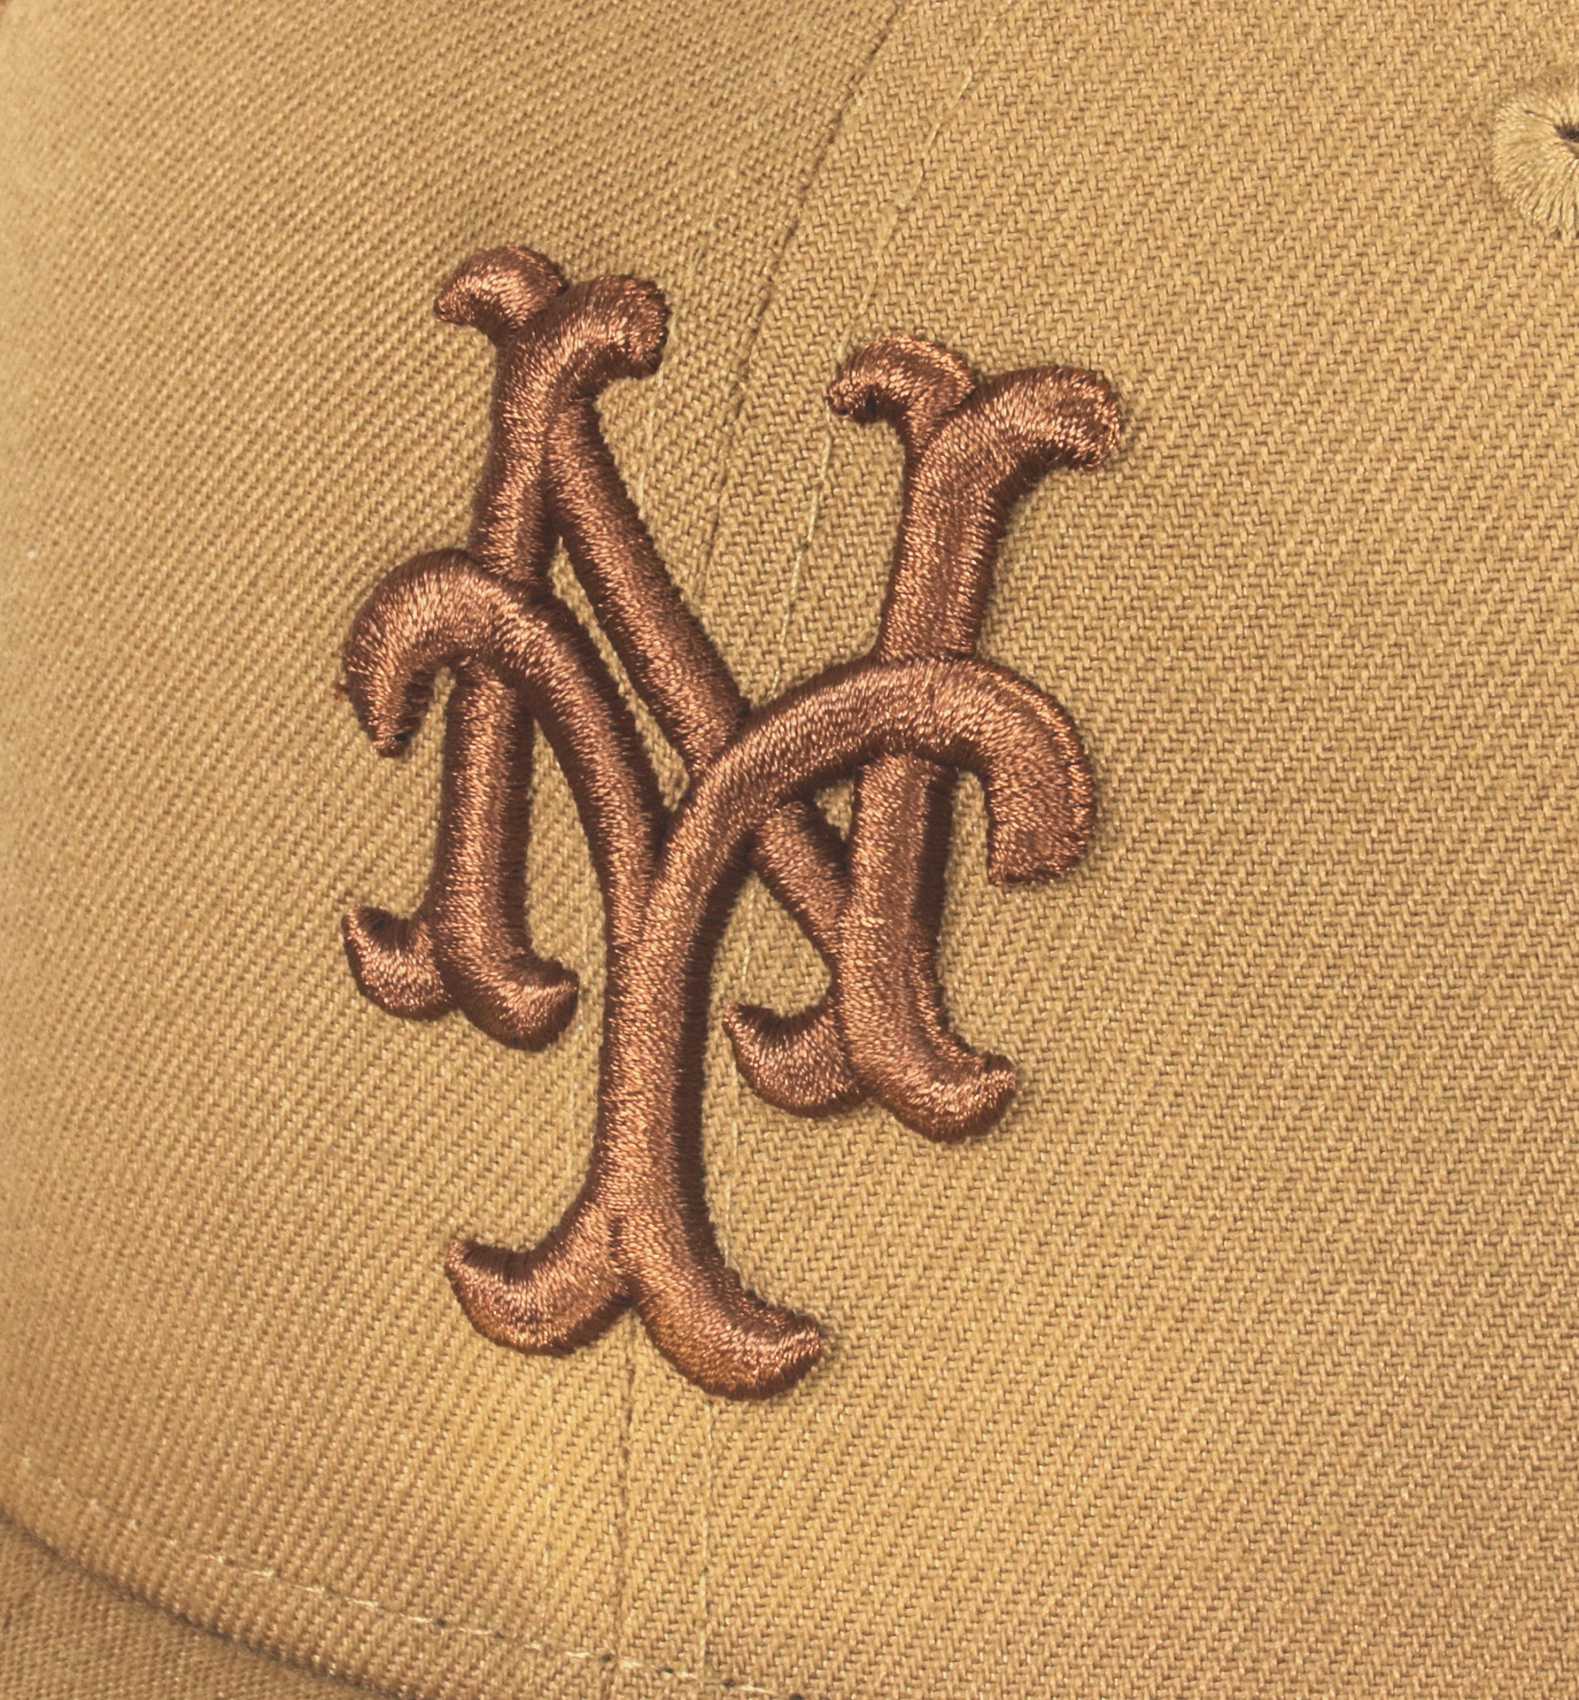 New York Mets All Star Game 1964 Brown 59Fifty Basecap New Era